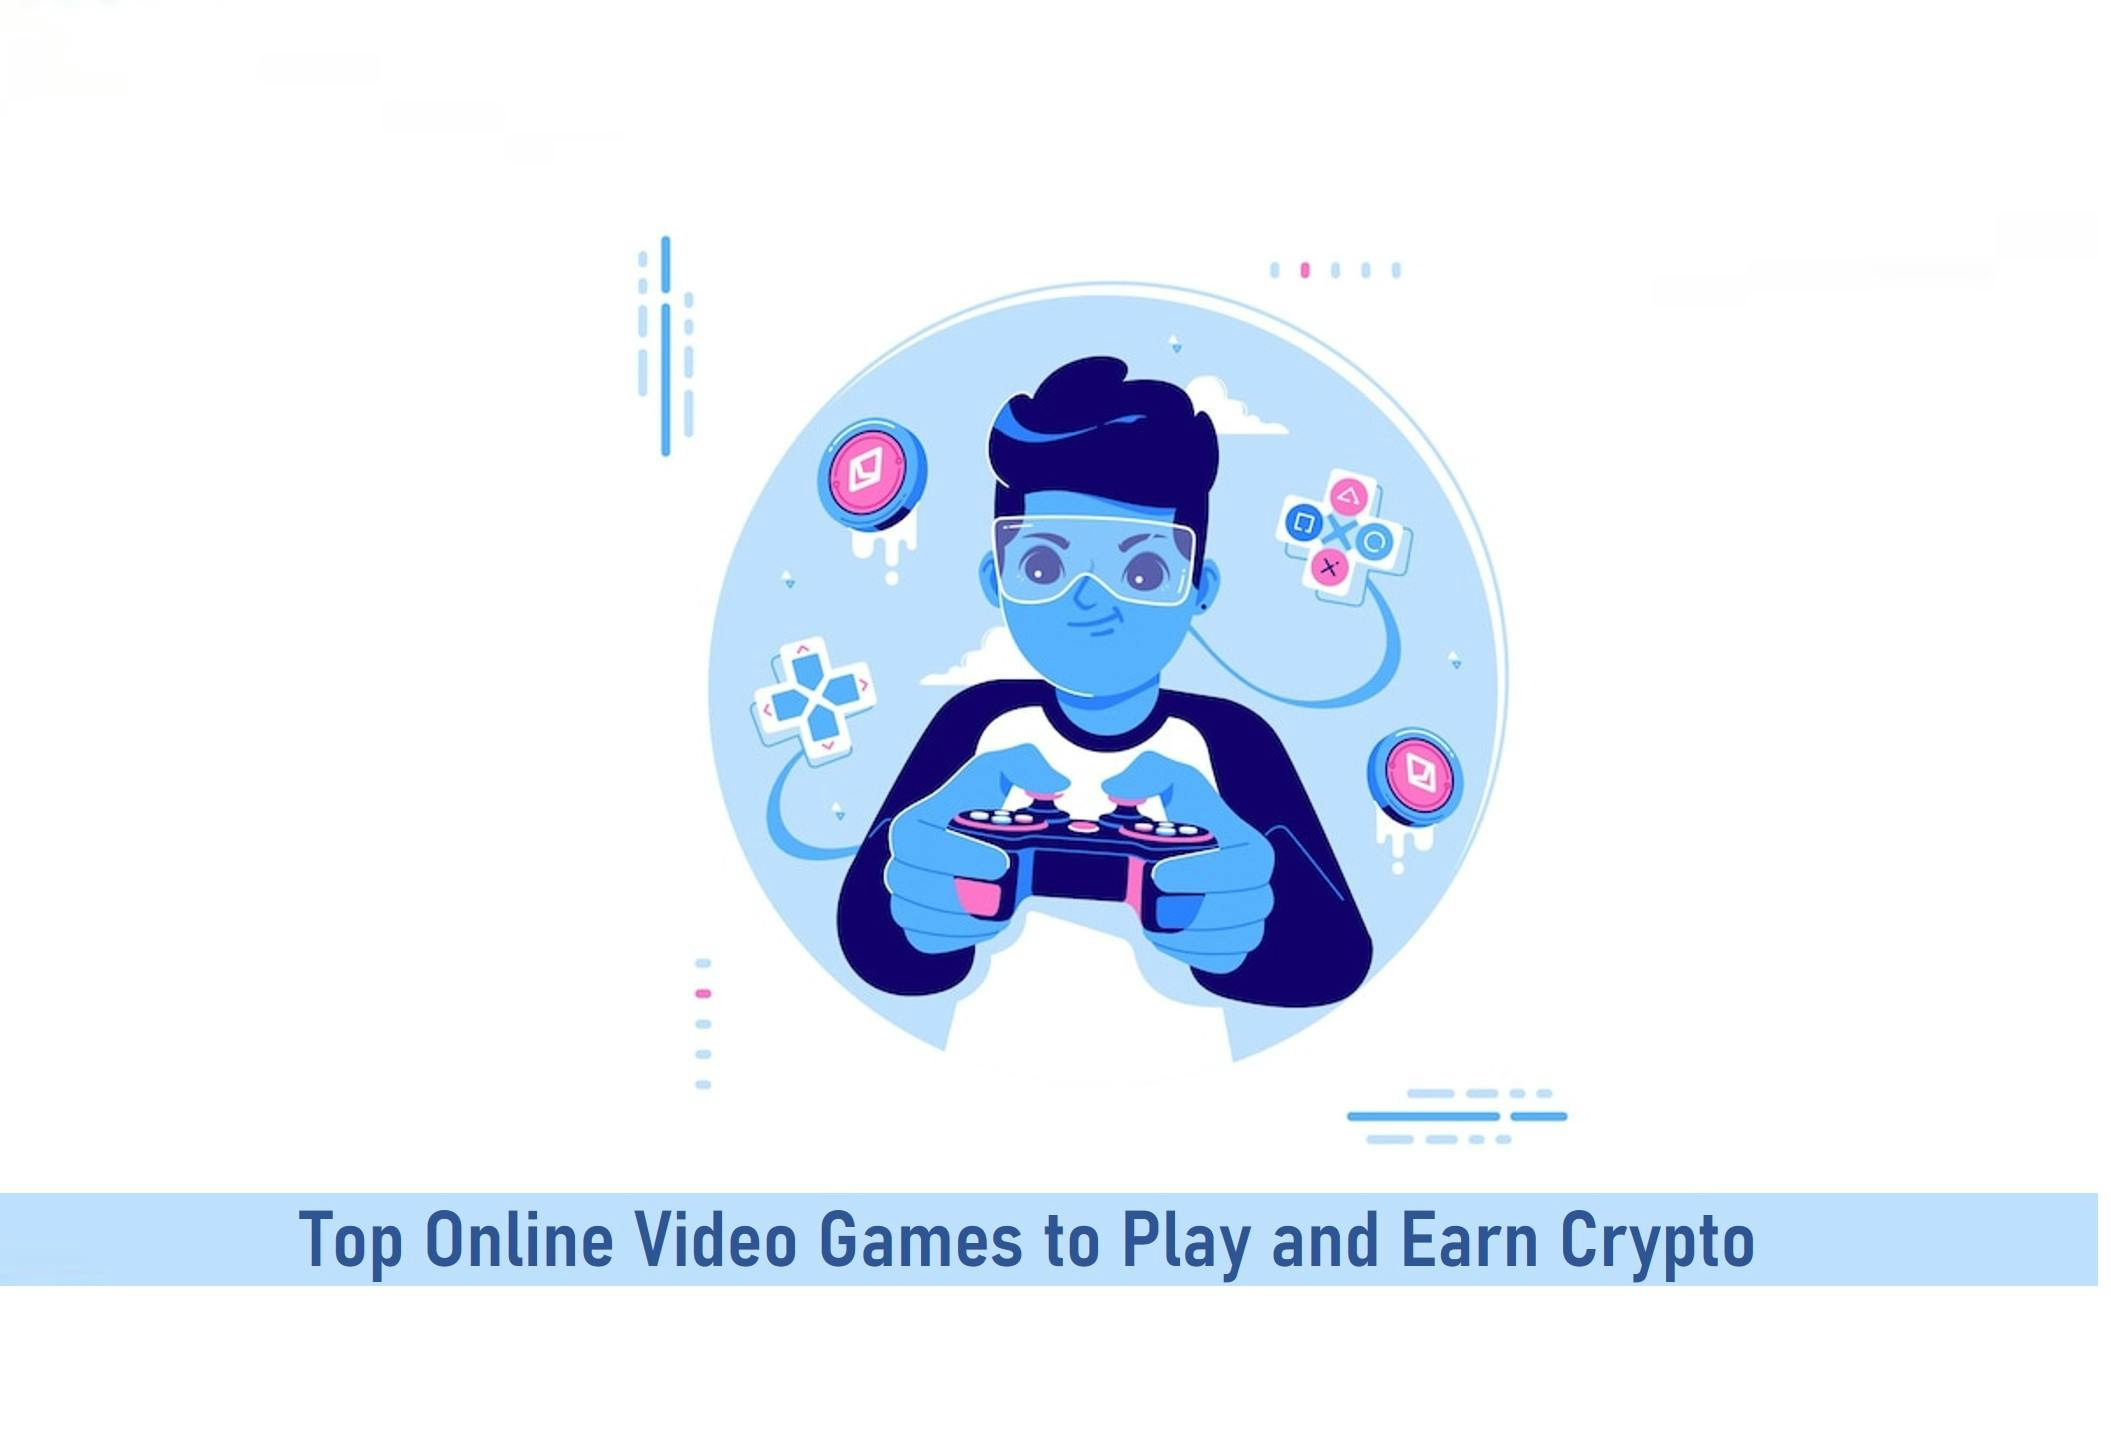 Top Online Video Games to Play and Earn Crypto in 2022